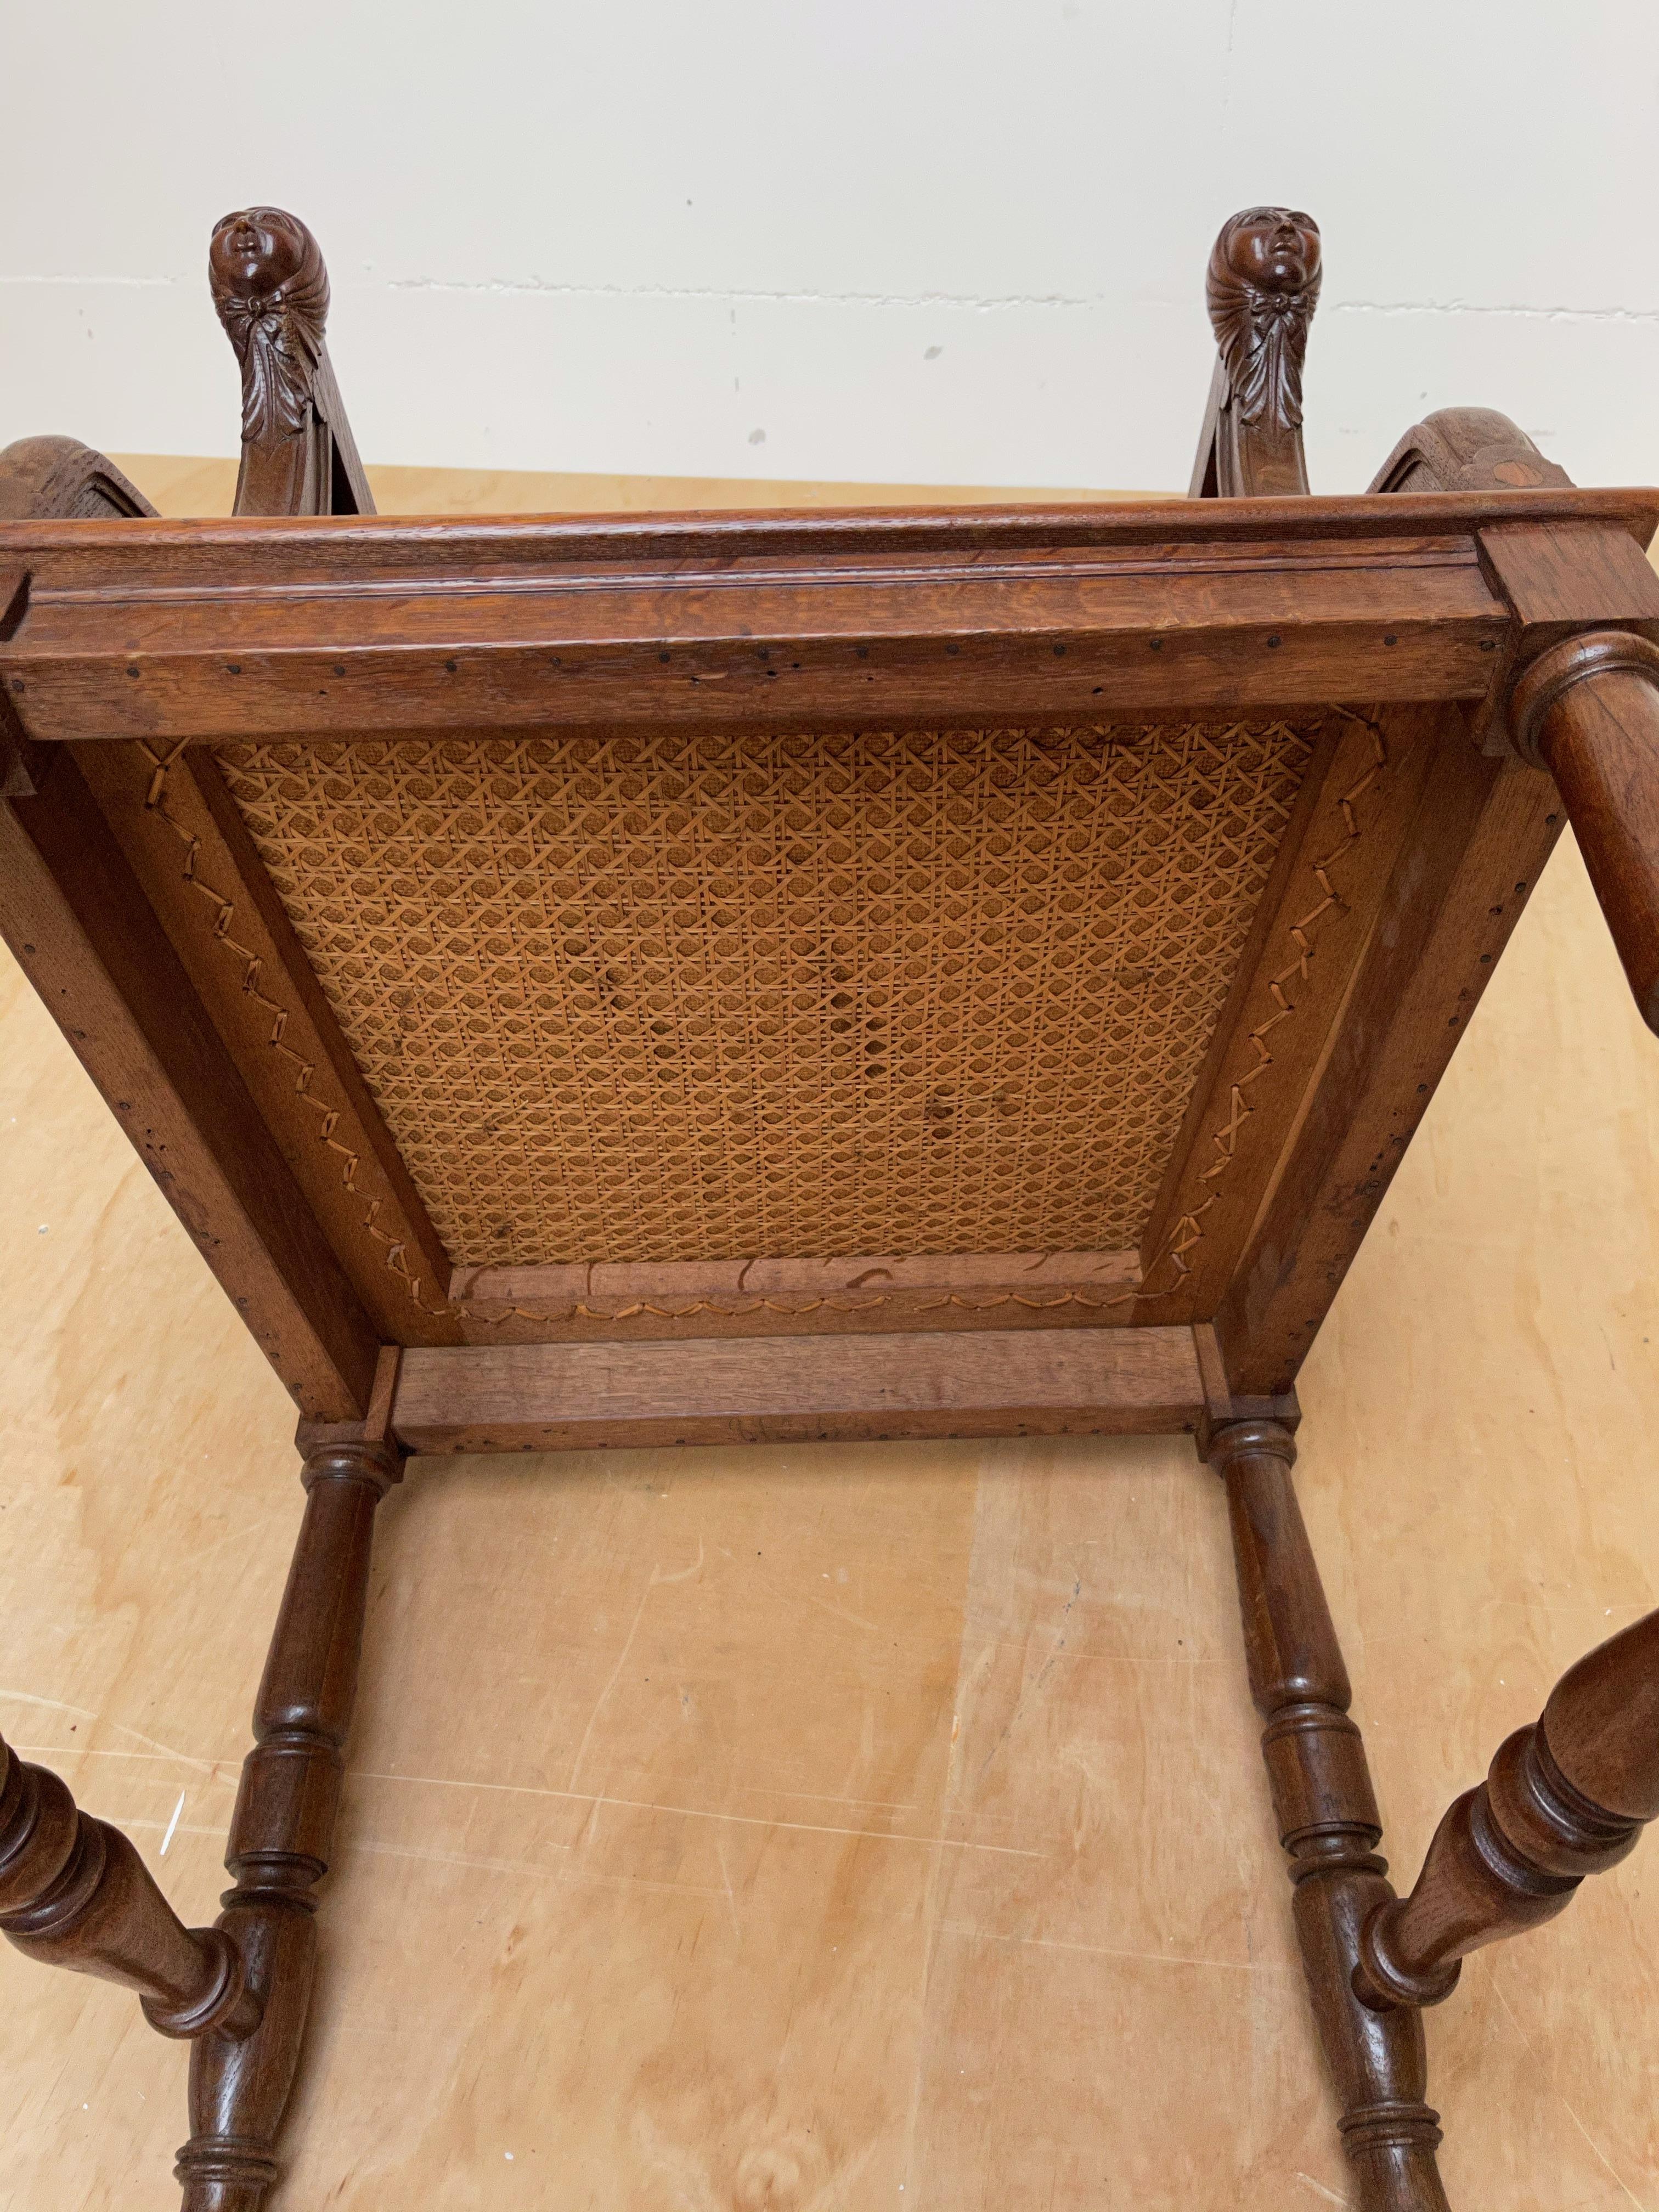 Rare Antique Gothic Revival Oak Armchair Chair w Female Sculptures in Armrests For Sale 10